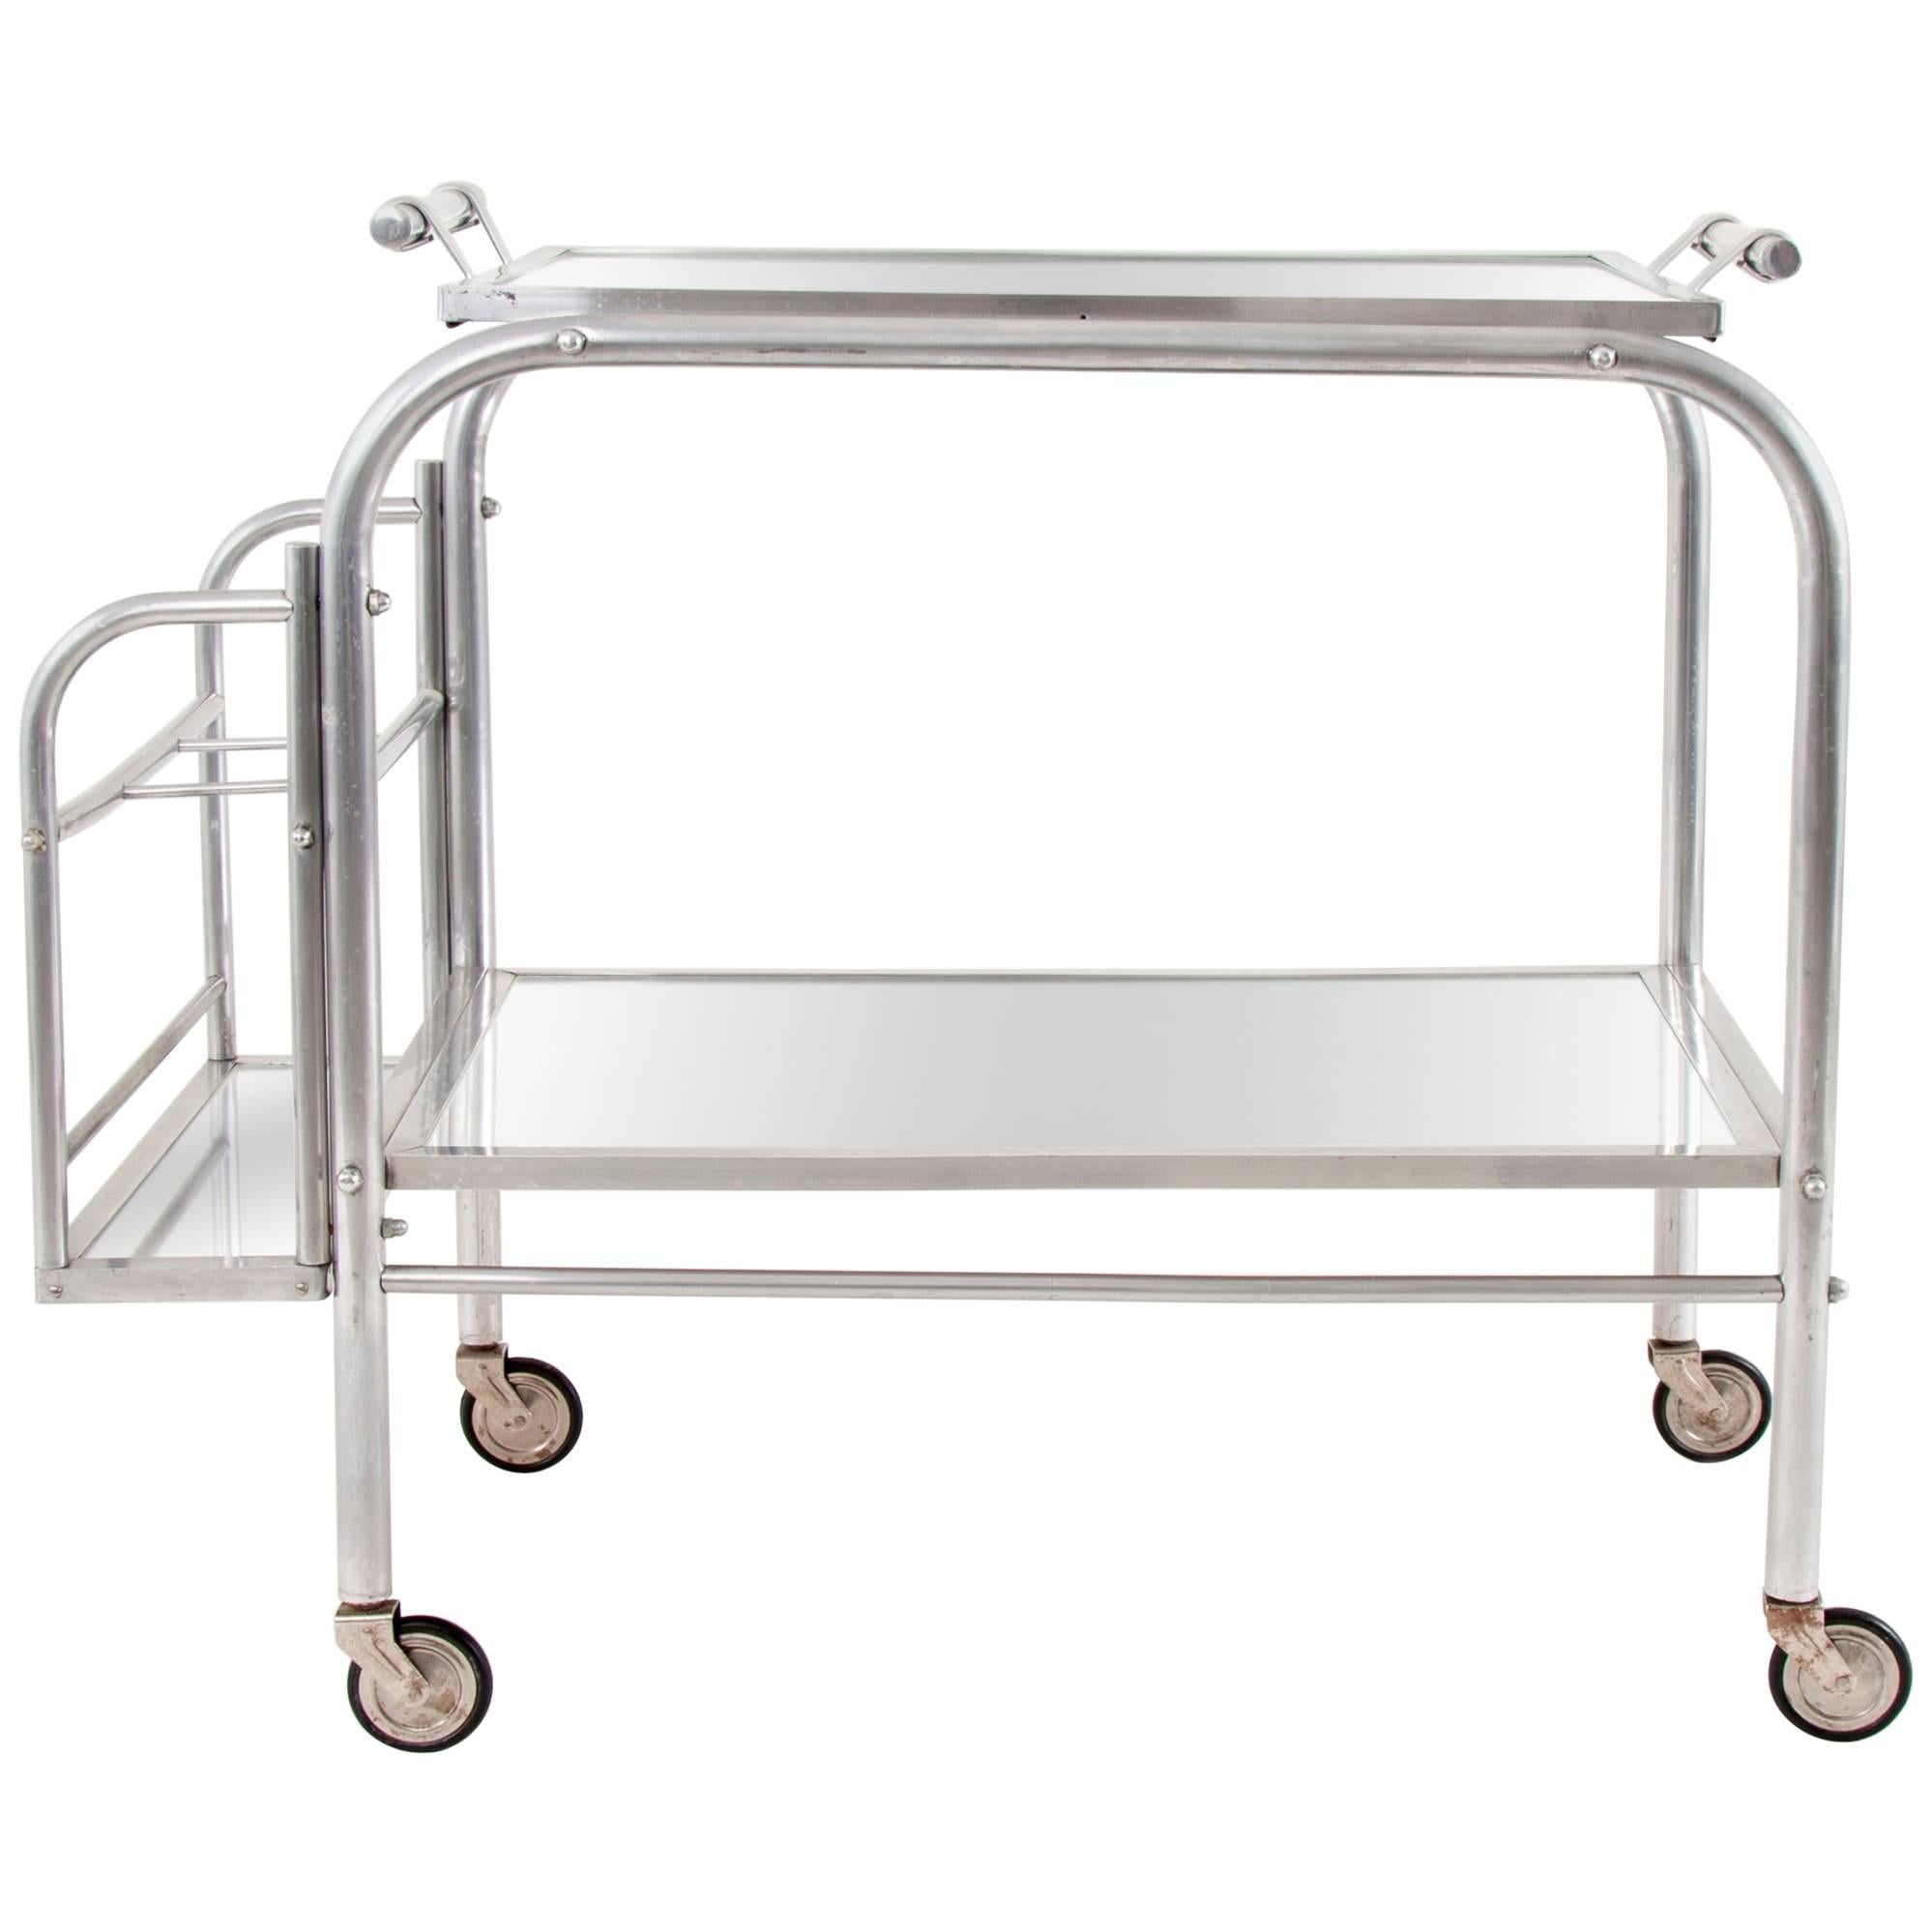 Art Deco Serving Bar Cart with Mirror Tray, Jacques Adnet Attributed, France